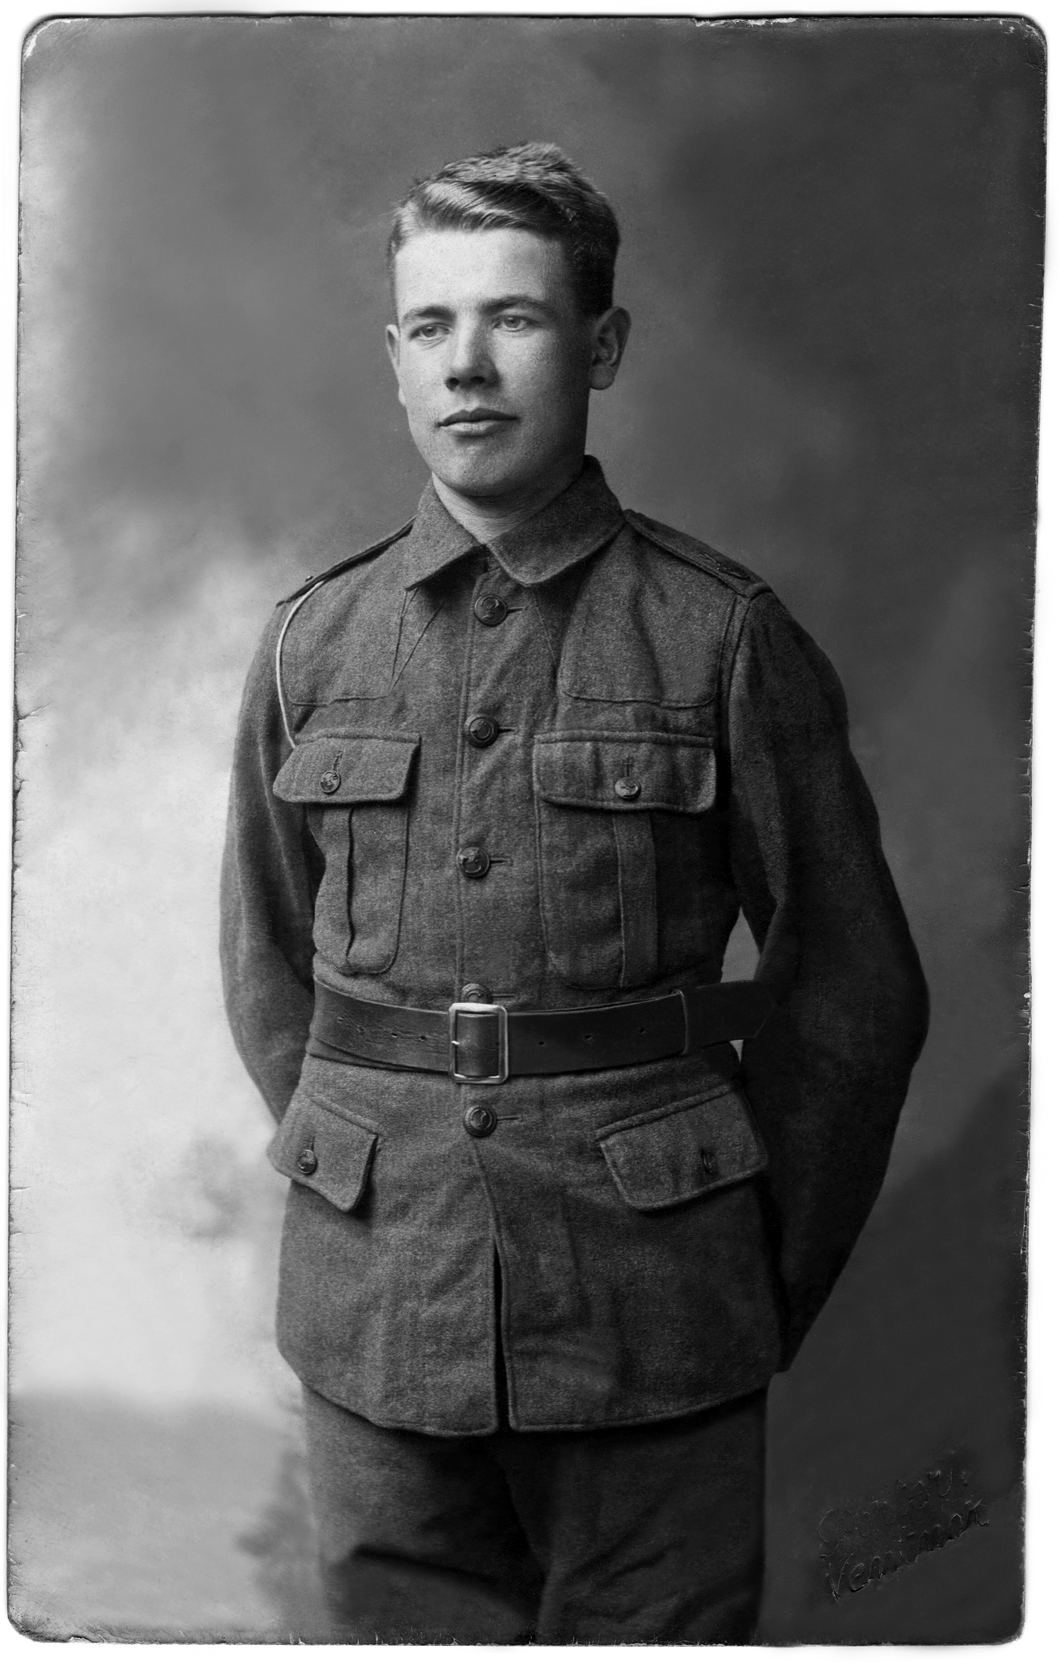 Private Frank Saunders